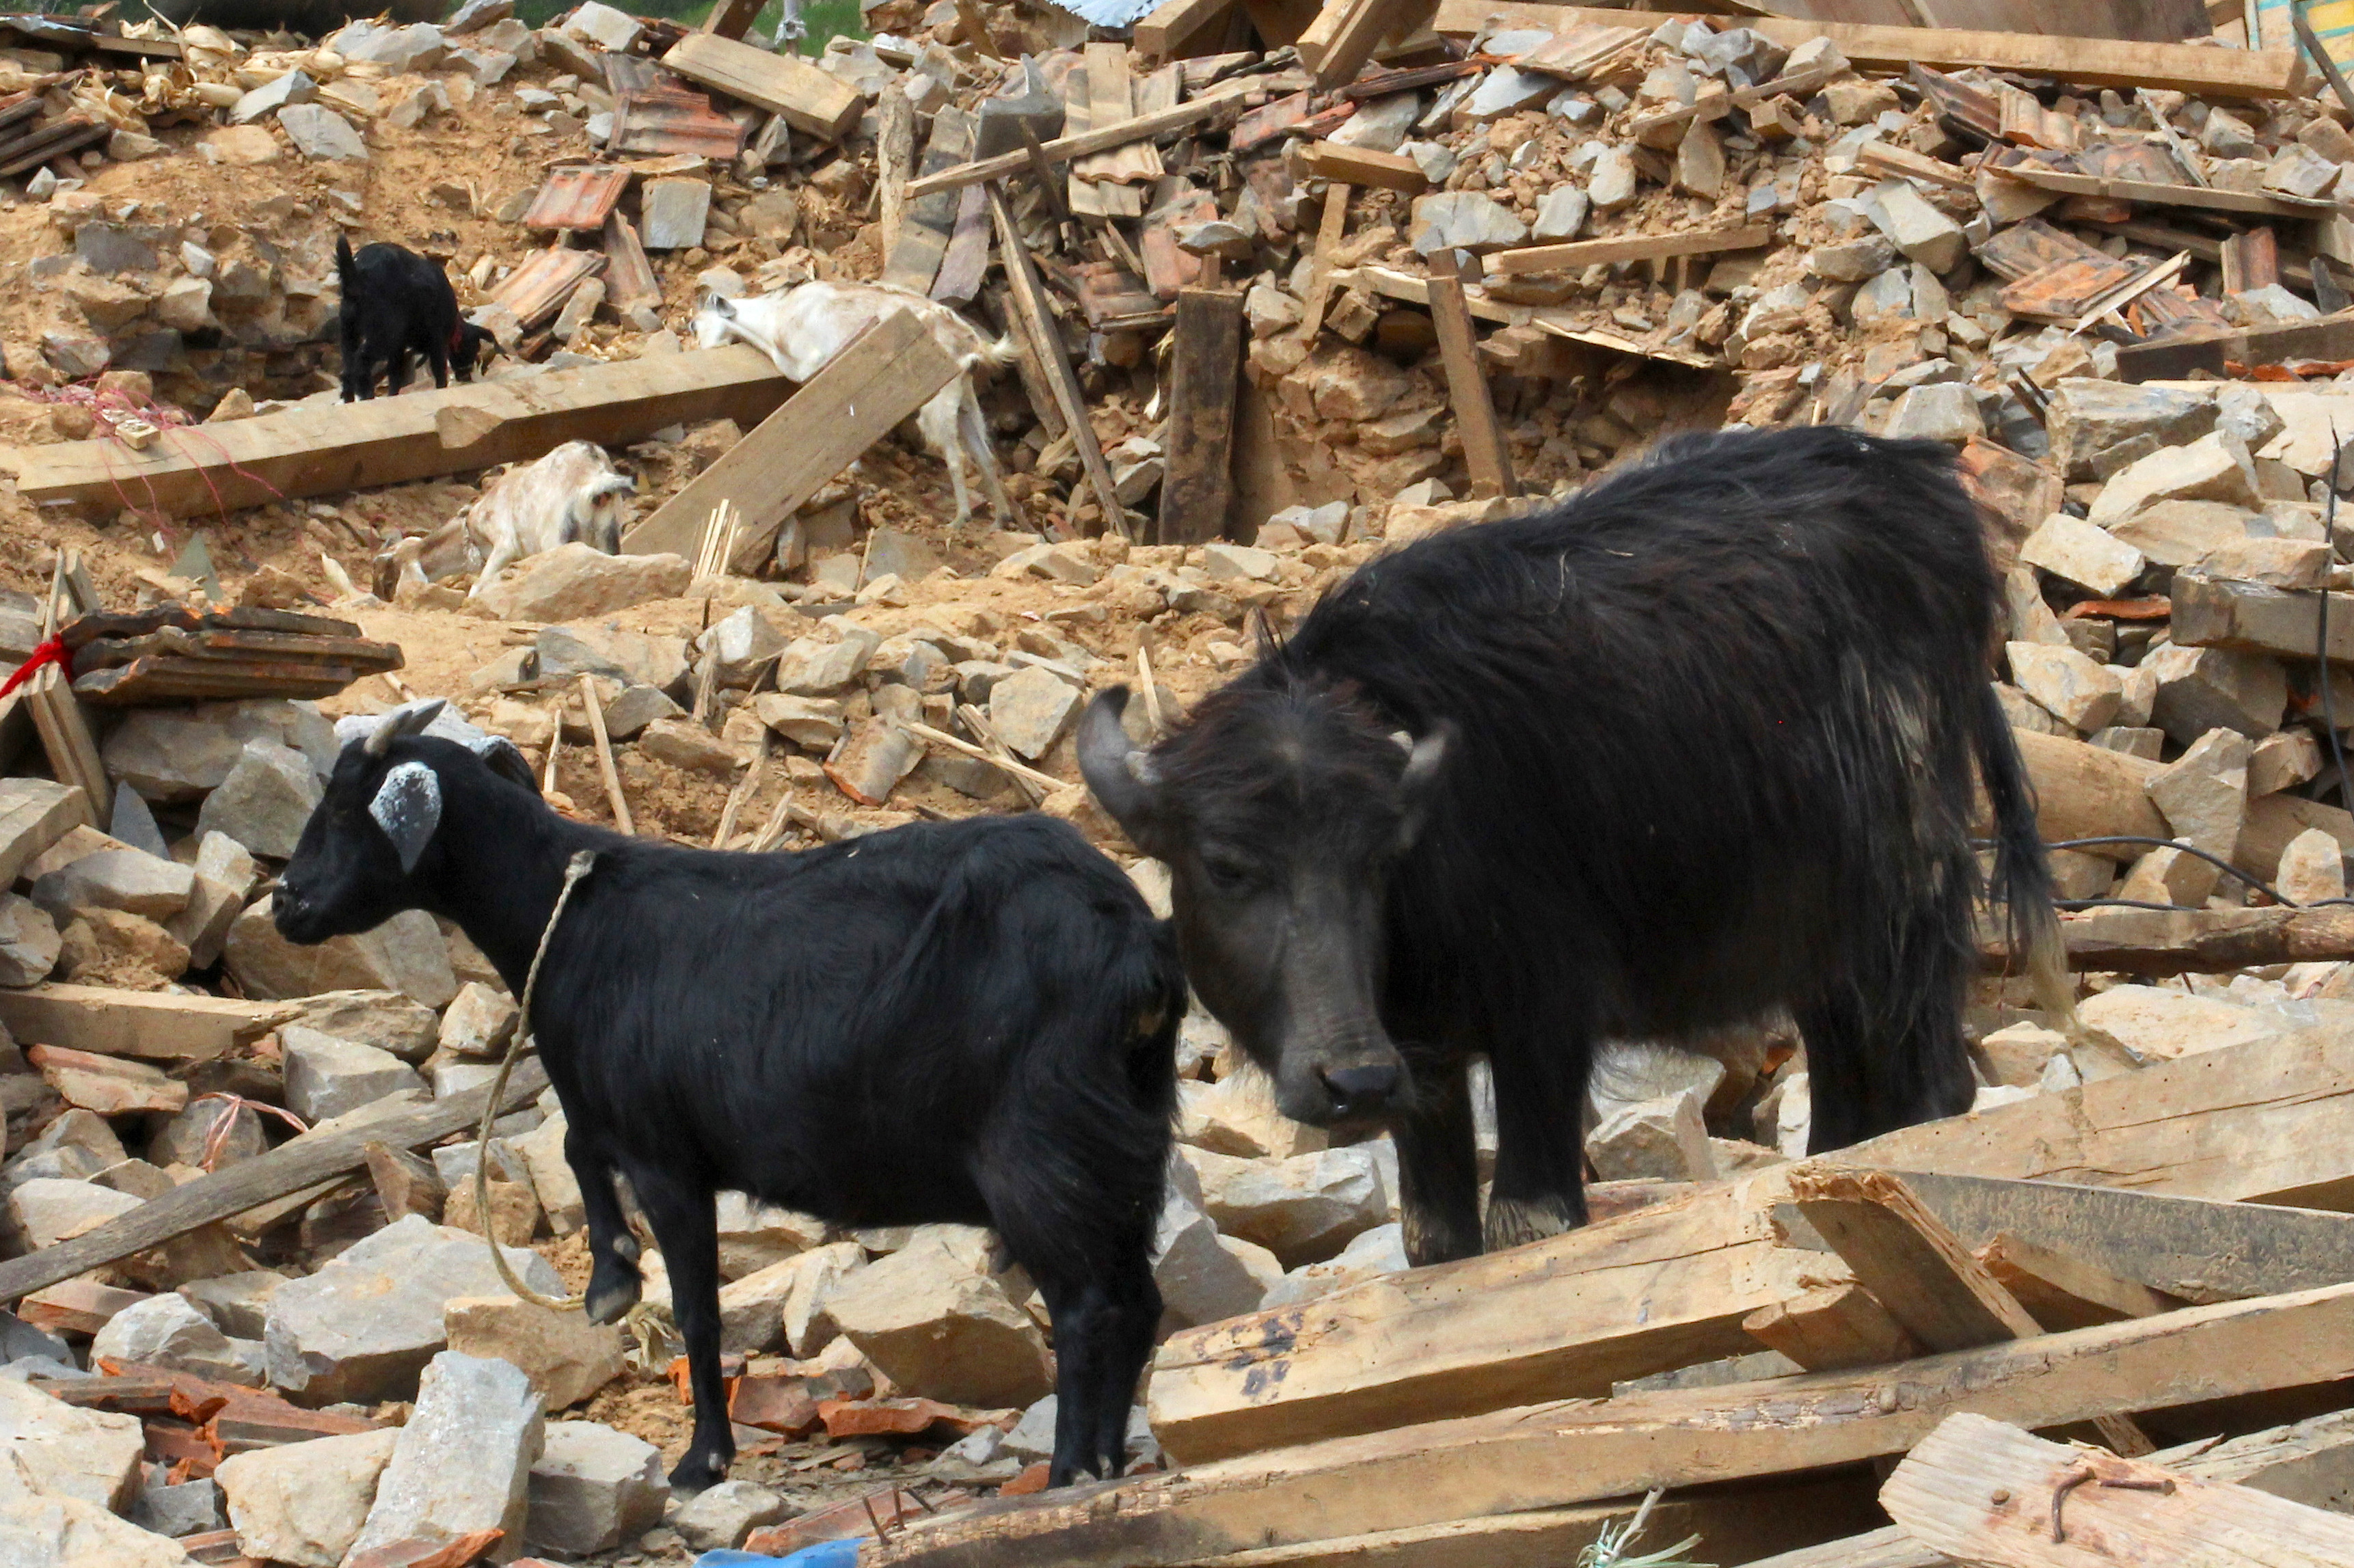 A six-month-old water buffalo calf and two adult female goats in the rubble of their former shelter, Kavre District, Nepal.